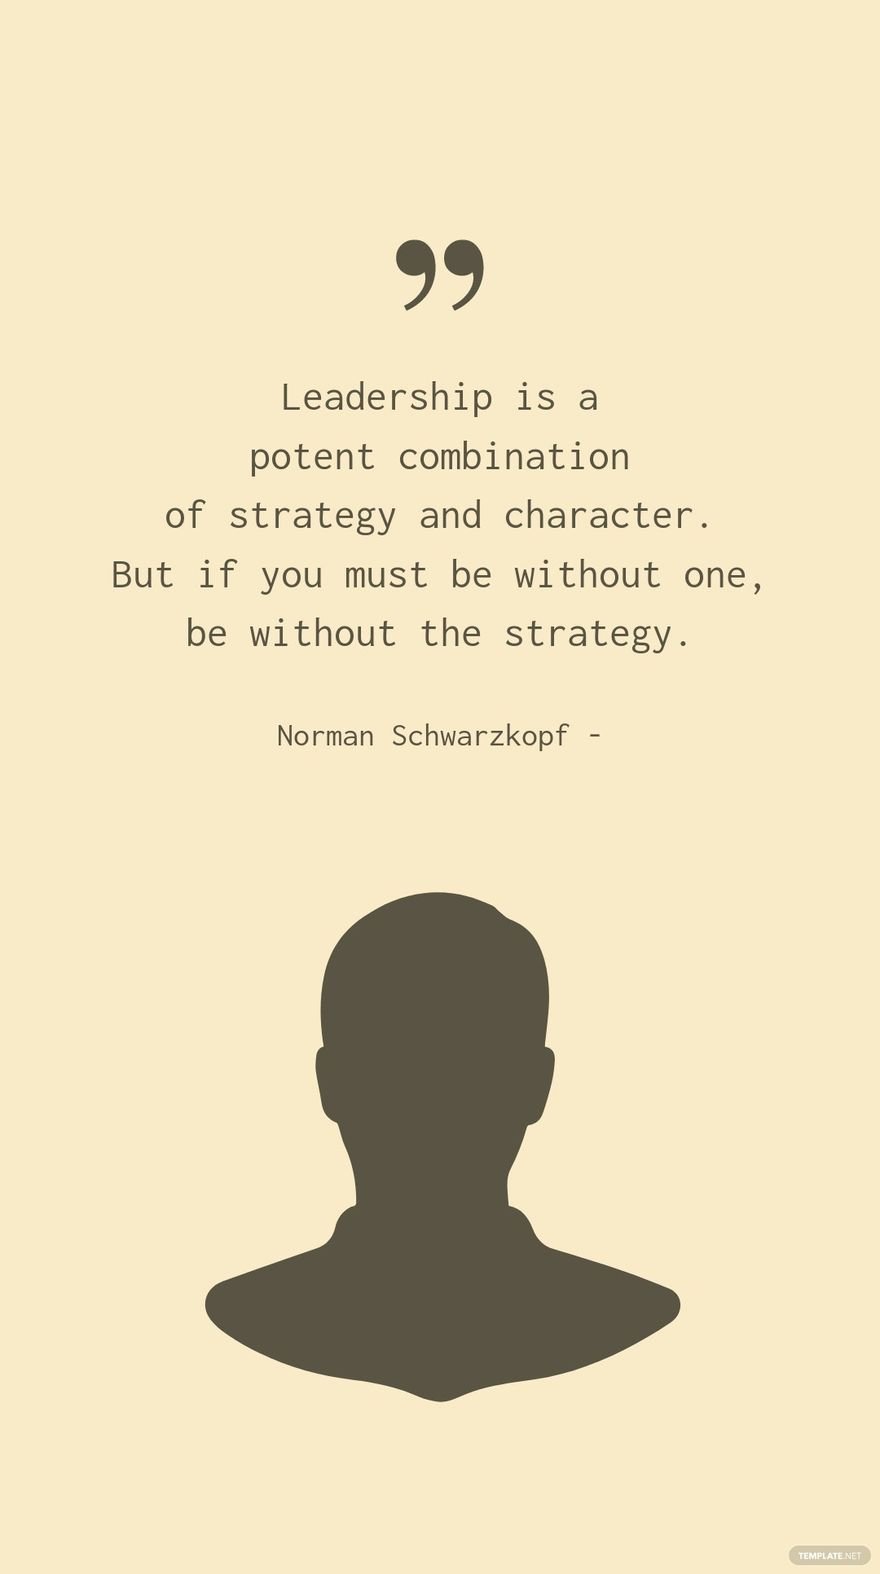 Norman Schwarzkopf - Leadership is a potent combination of strategy and character. But if you must be without one, be without the strategy.